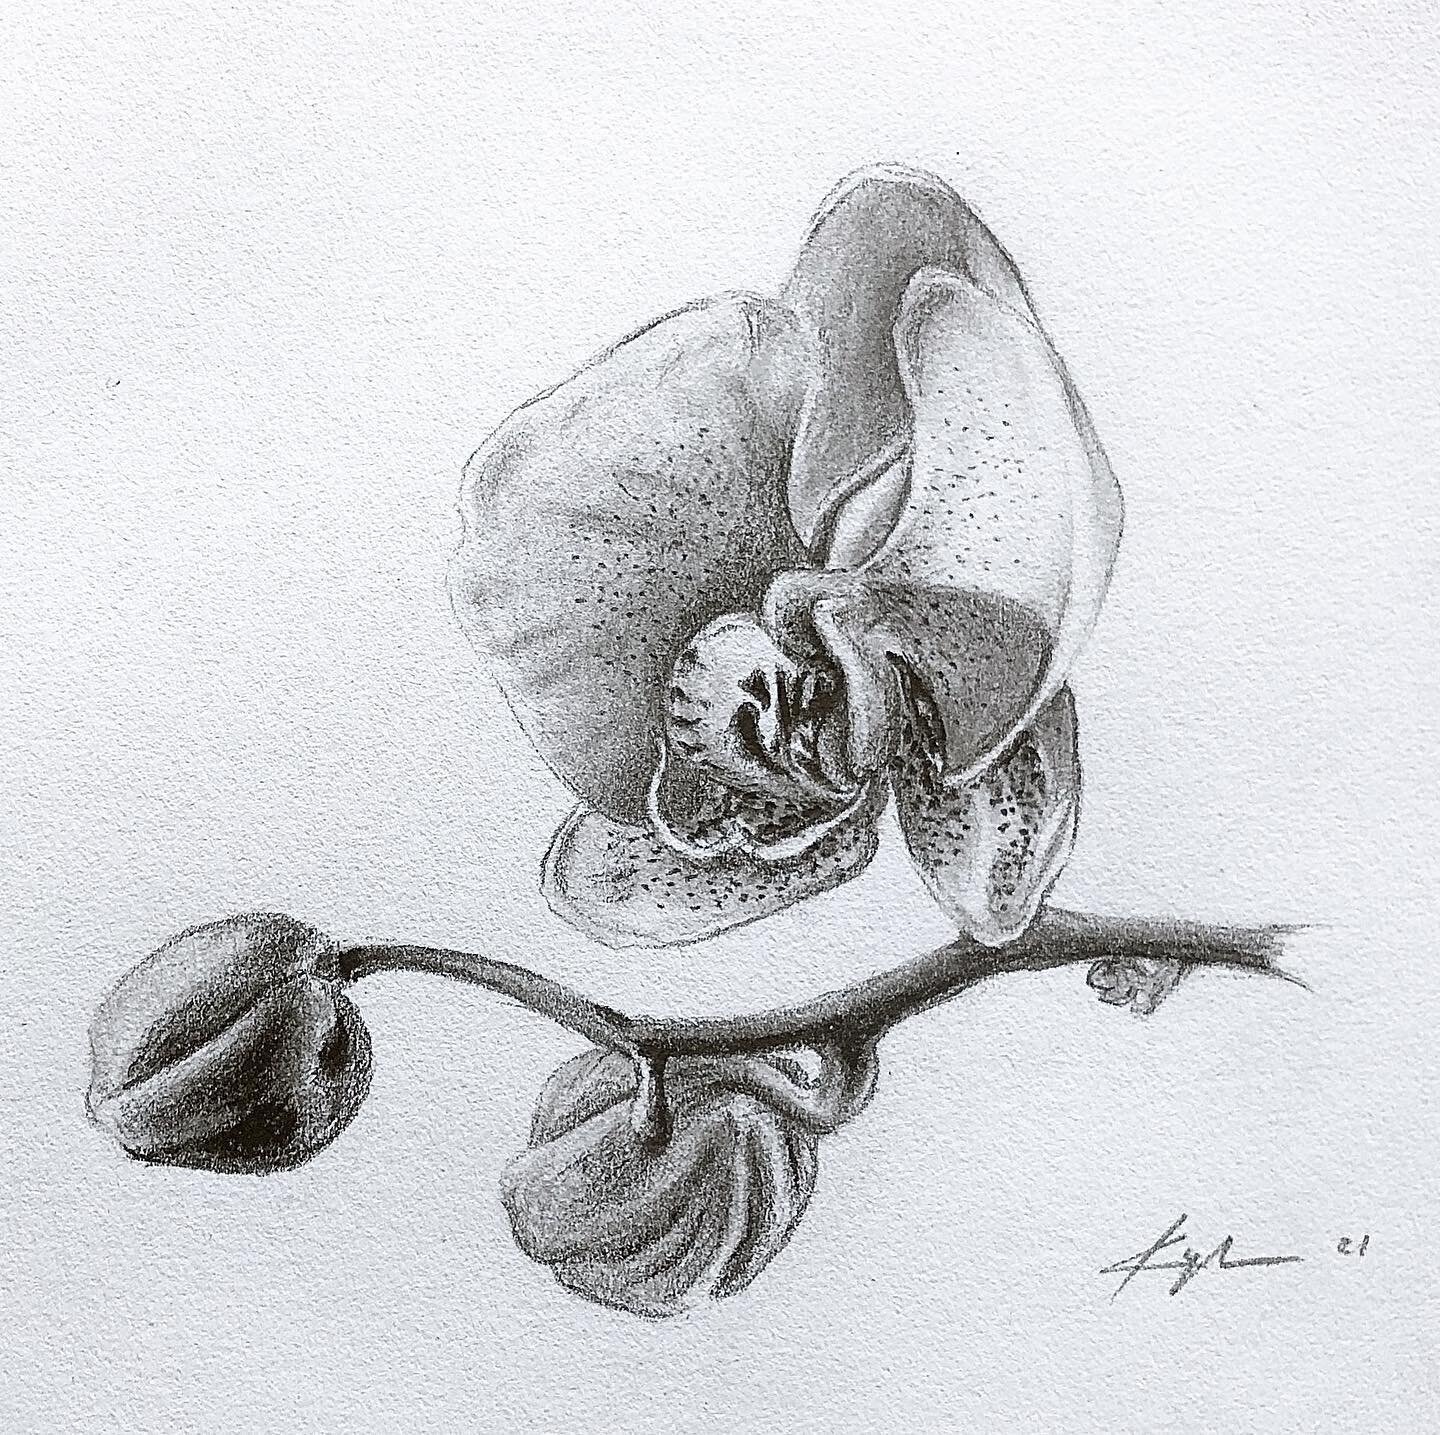 Did you hear about the florist who died in an accident?
Turns out he was an Orchid donor.

#orchid #drawing #drawingoftheday #art #artist #artwork #artoftheday #artistsoninstagram #artists #artistsofinstagram #artlife #artlovers #artstagram #artforsa